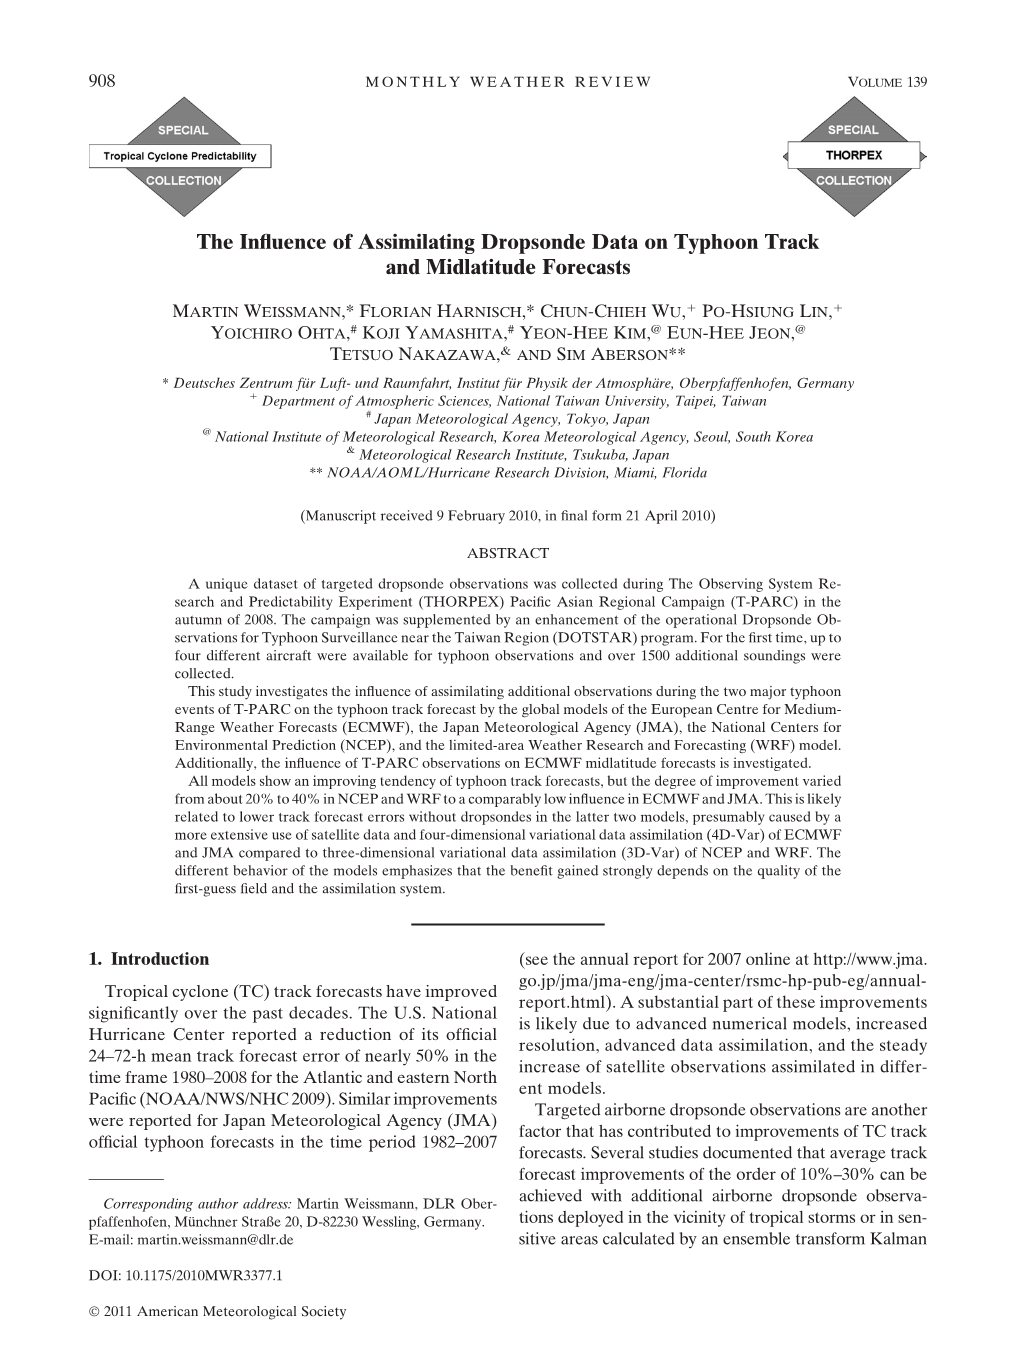 The Influence of Assimilating Dropsonde Data on Typhoon Track